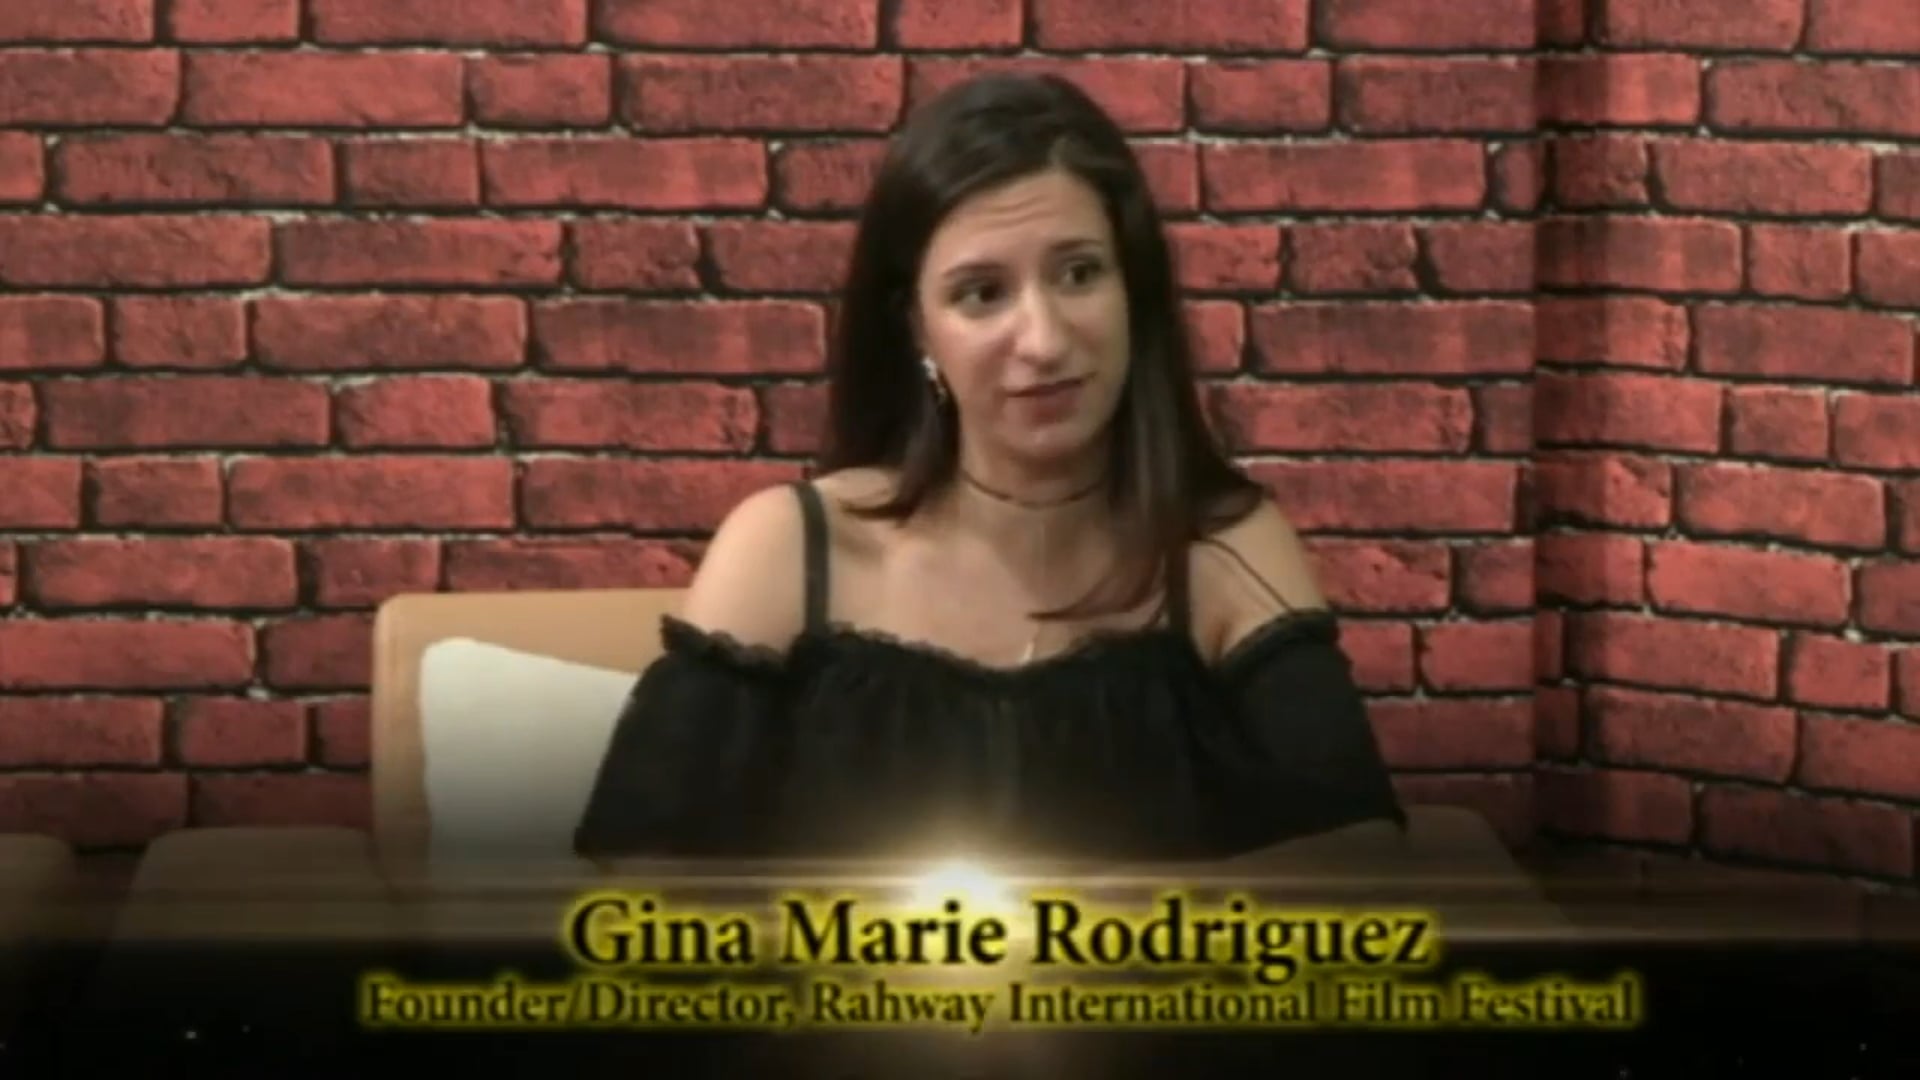 Gina Marie Rodriguez Appearance on "Inside Hollywood on the Hudson"